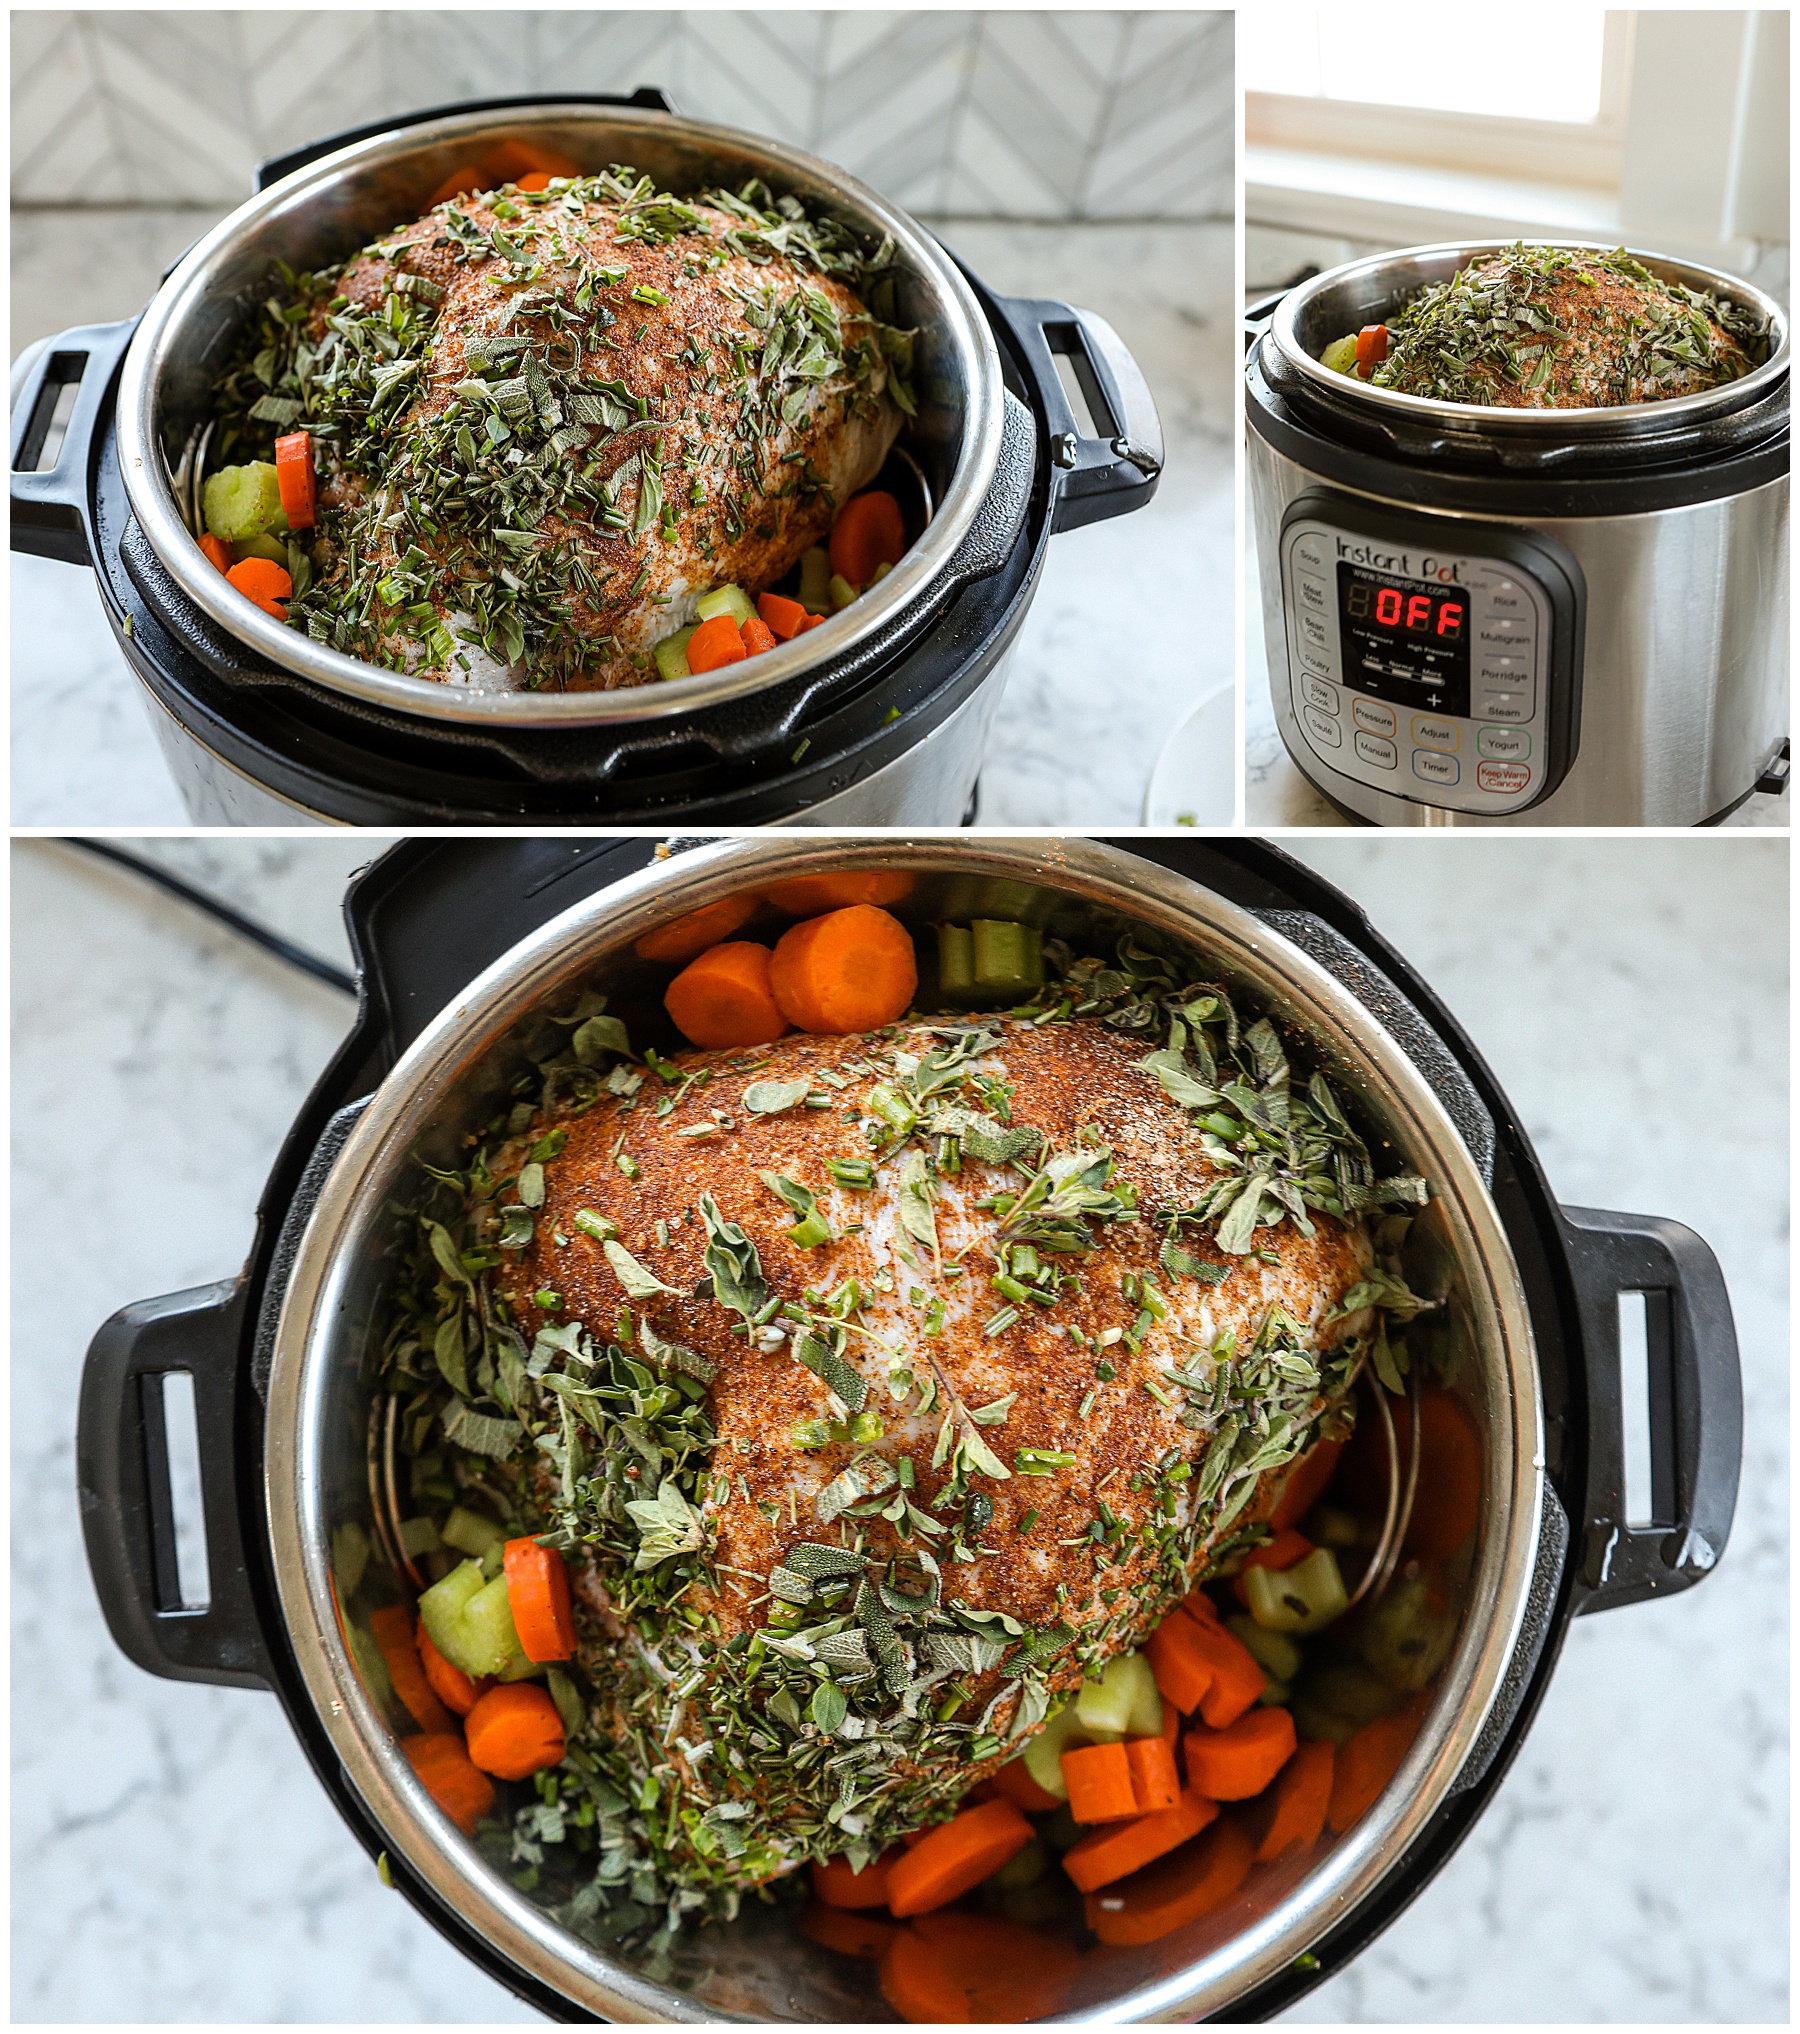 Cooking a turkey in an instant pot